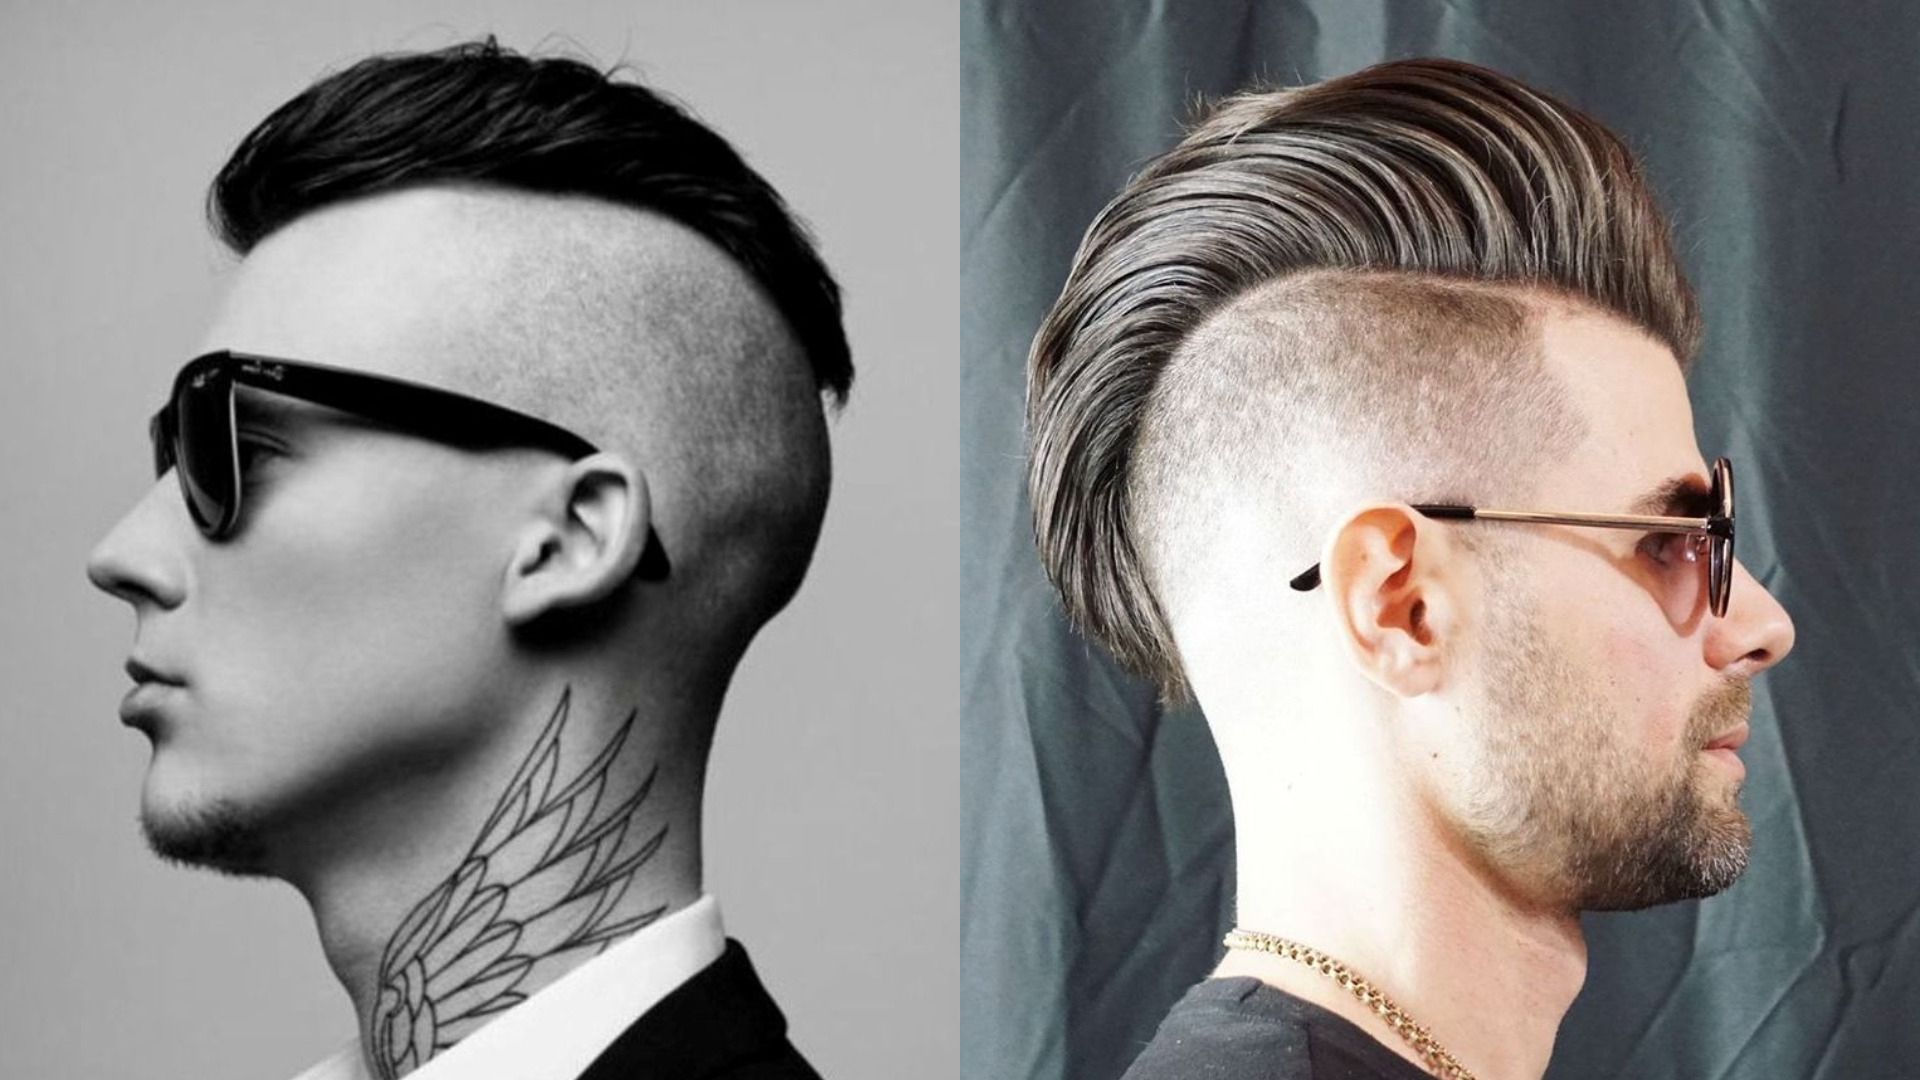 Mohawk Hairstyles: 50 Best Haircuts For Men 2018 – Atoz With 2021 Long Straight Hair Mohawk Hairstyles (View 13 of 20)